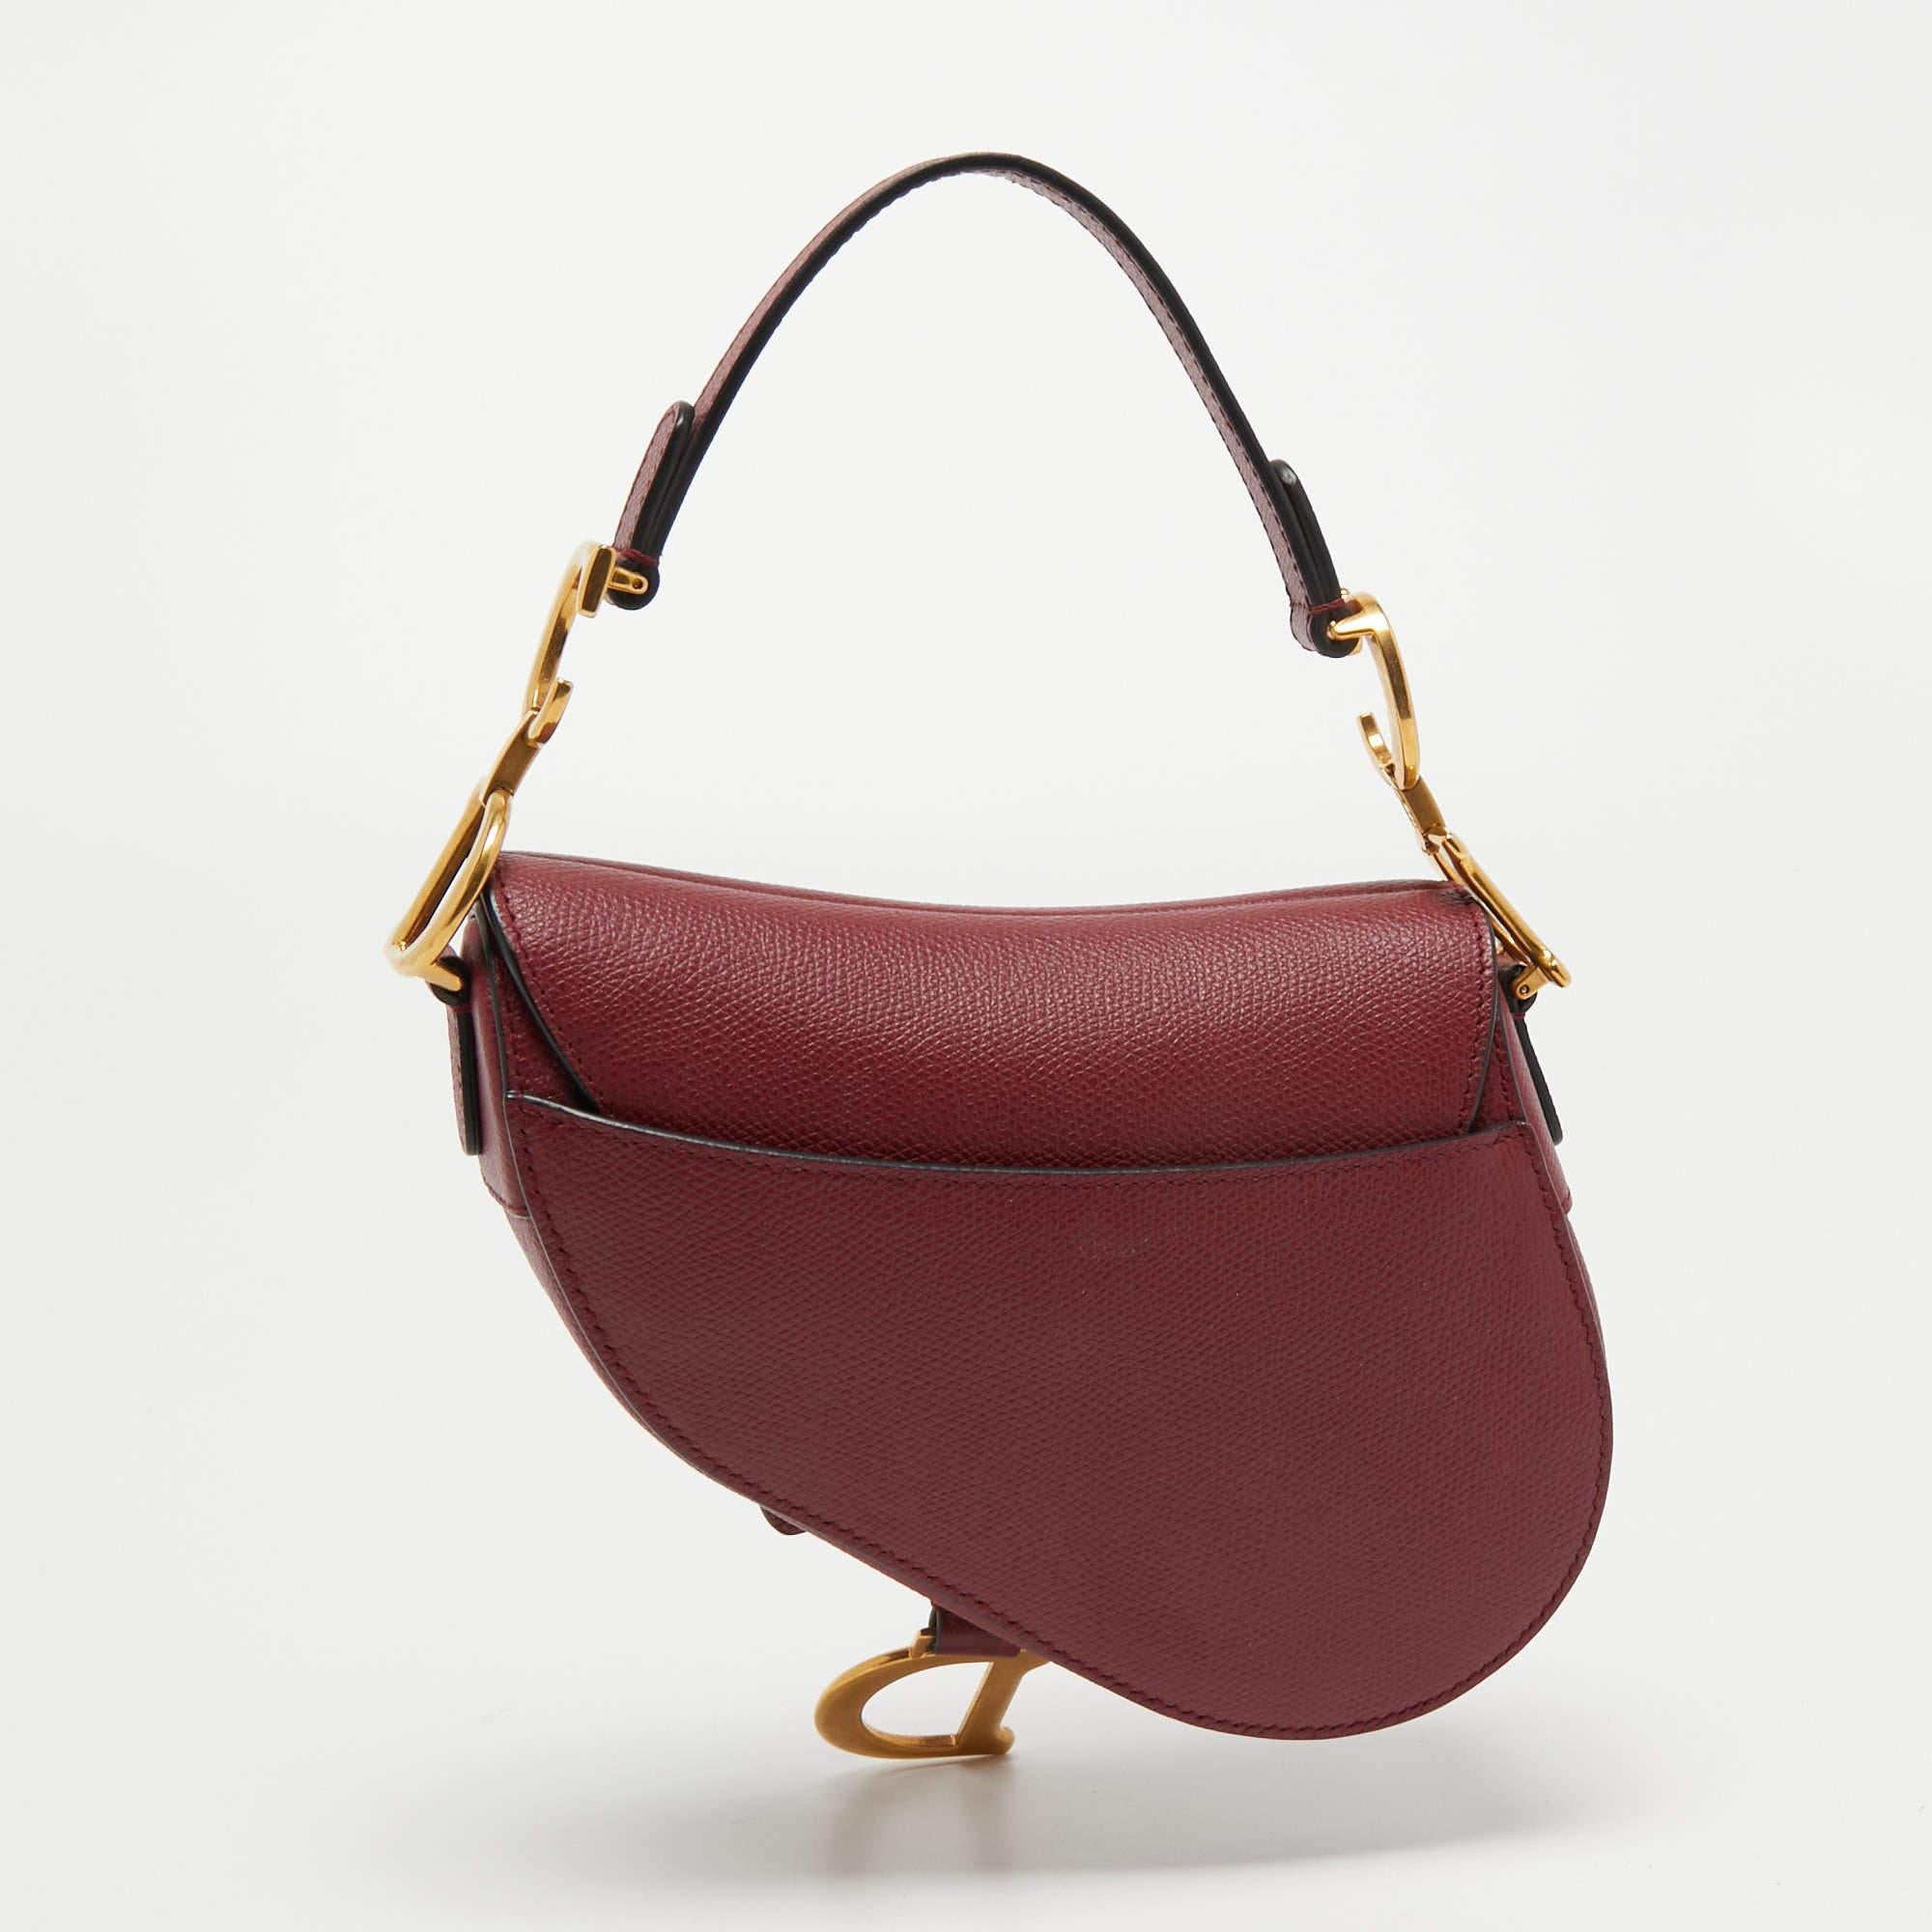 The Dior Saddle made a huge comeback in 2018, and since then, it has been ruling the wishlist of all the fashion elite. A reflection of timeless style and great design, this Dior Saddle bag is sought after for all the right reasons. This bag for